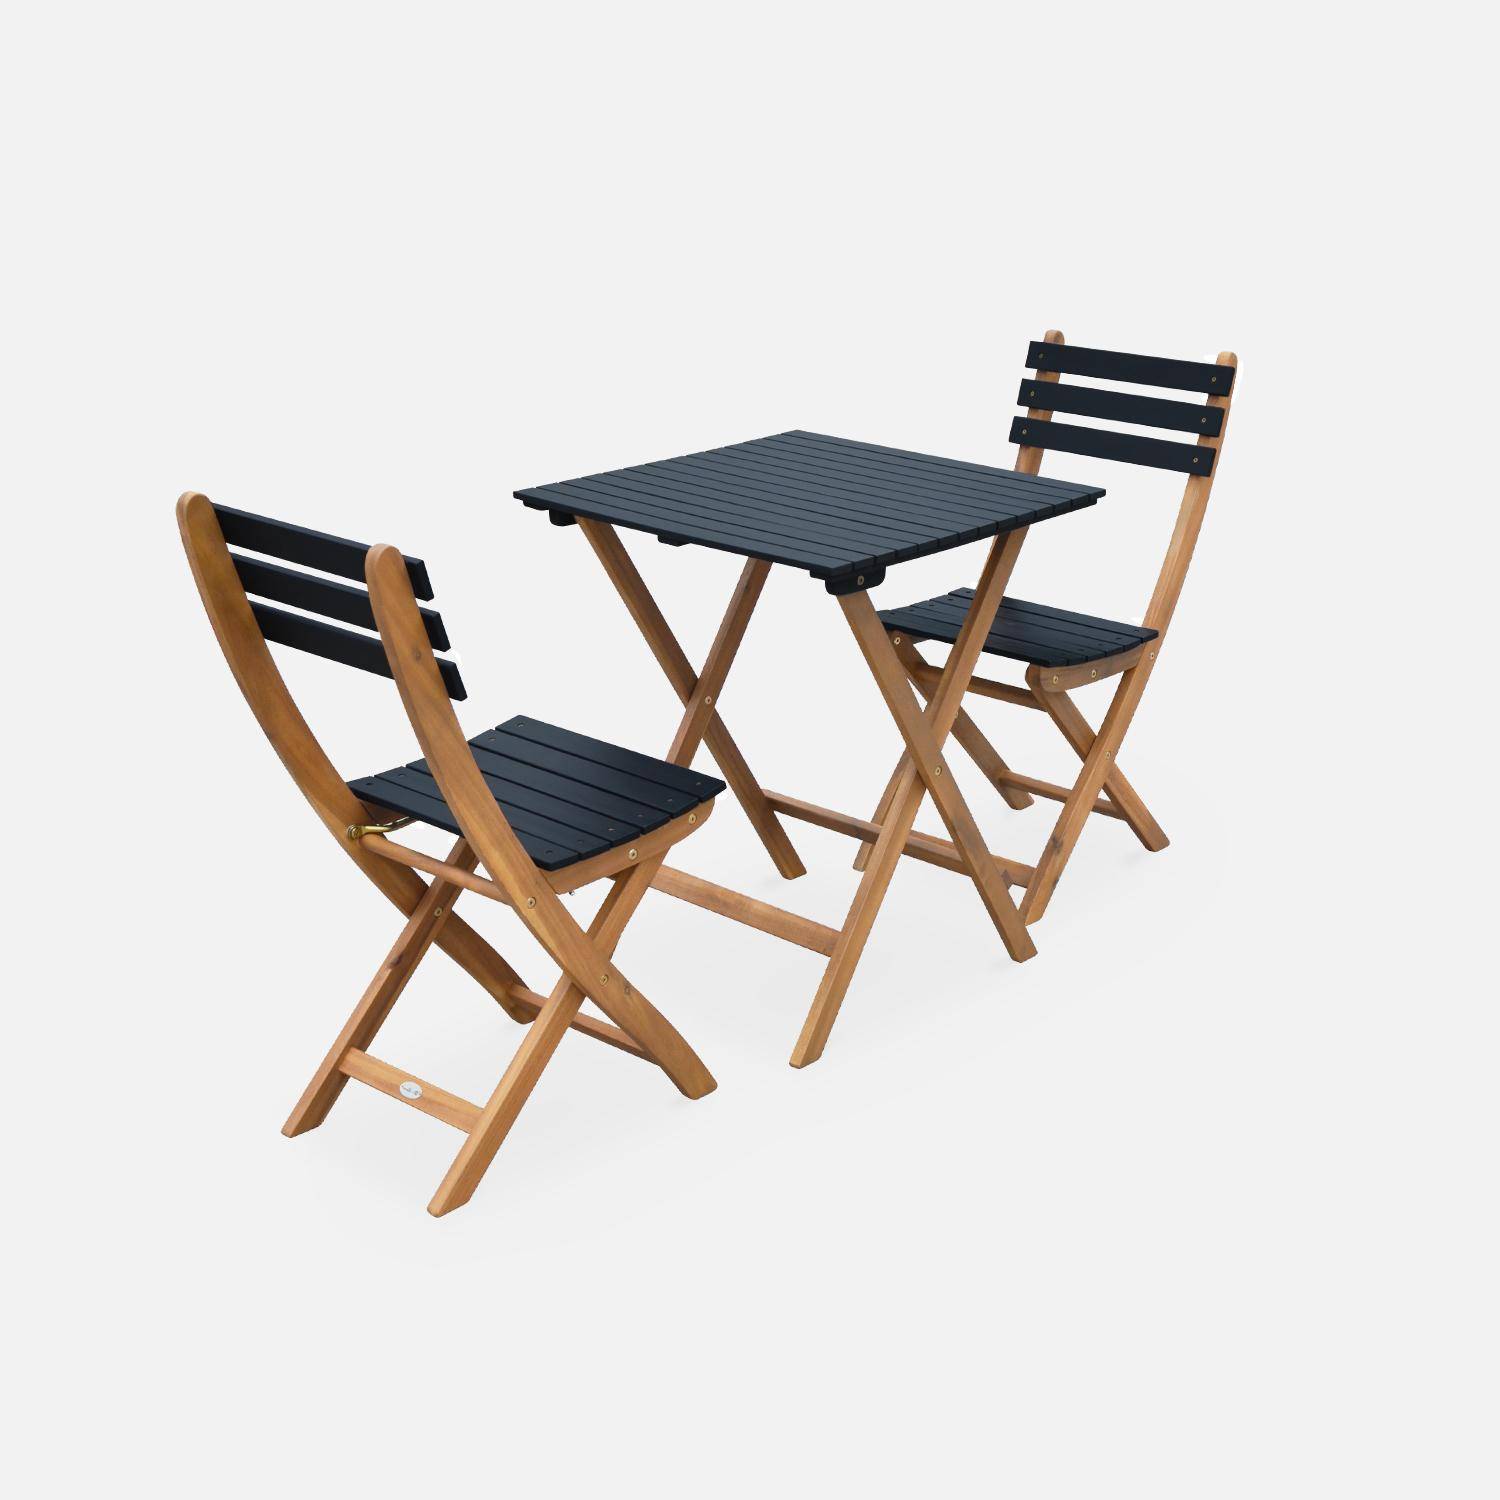 2-seater foldable wooden bistro garden table with chairs, 60x60cm - Barcelona - Black Photo4